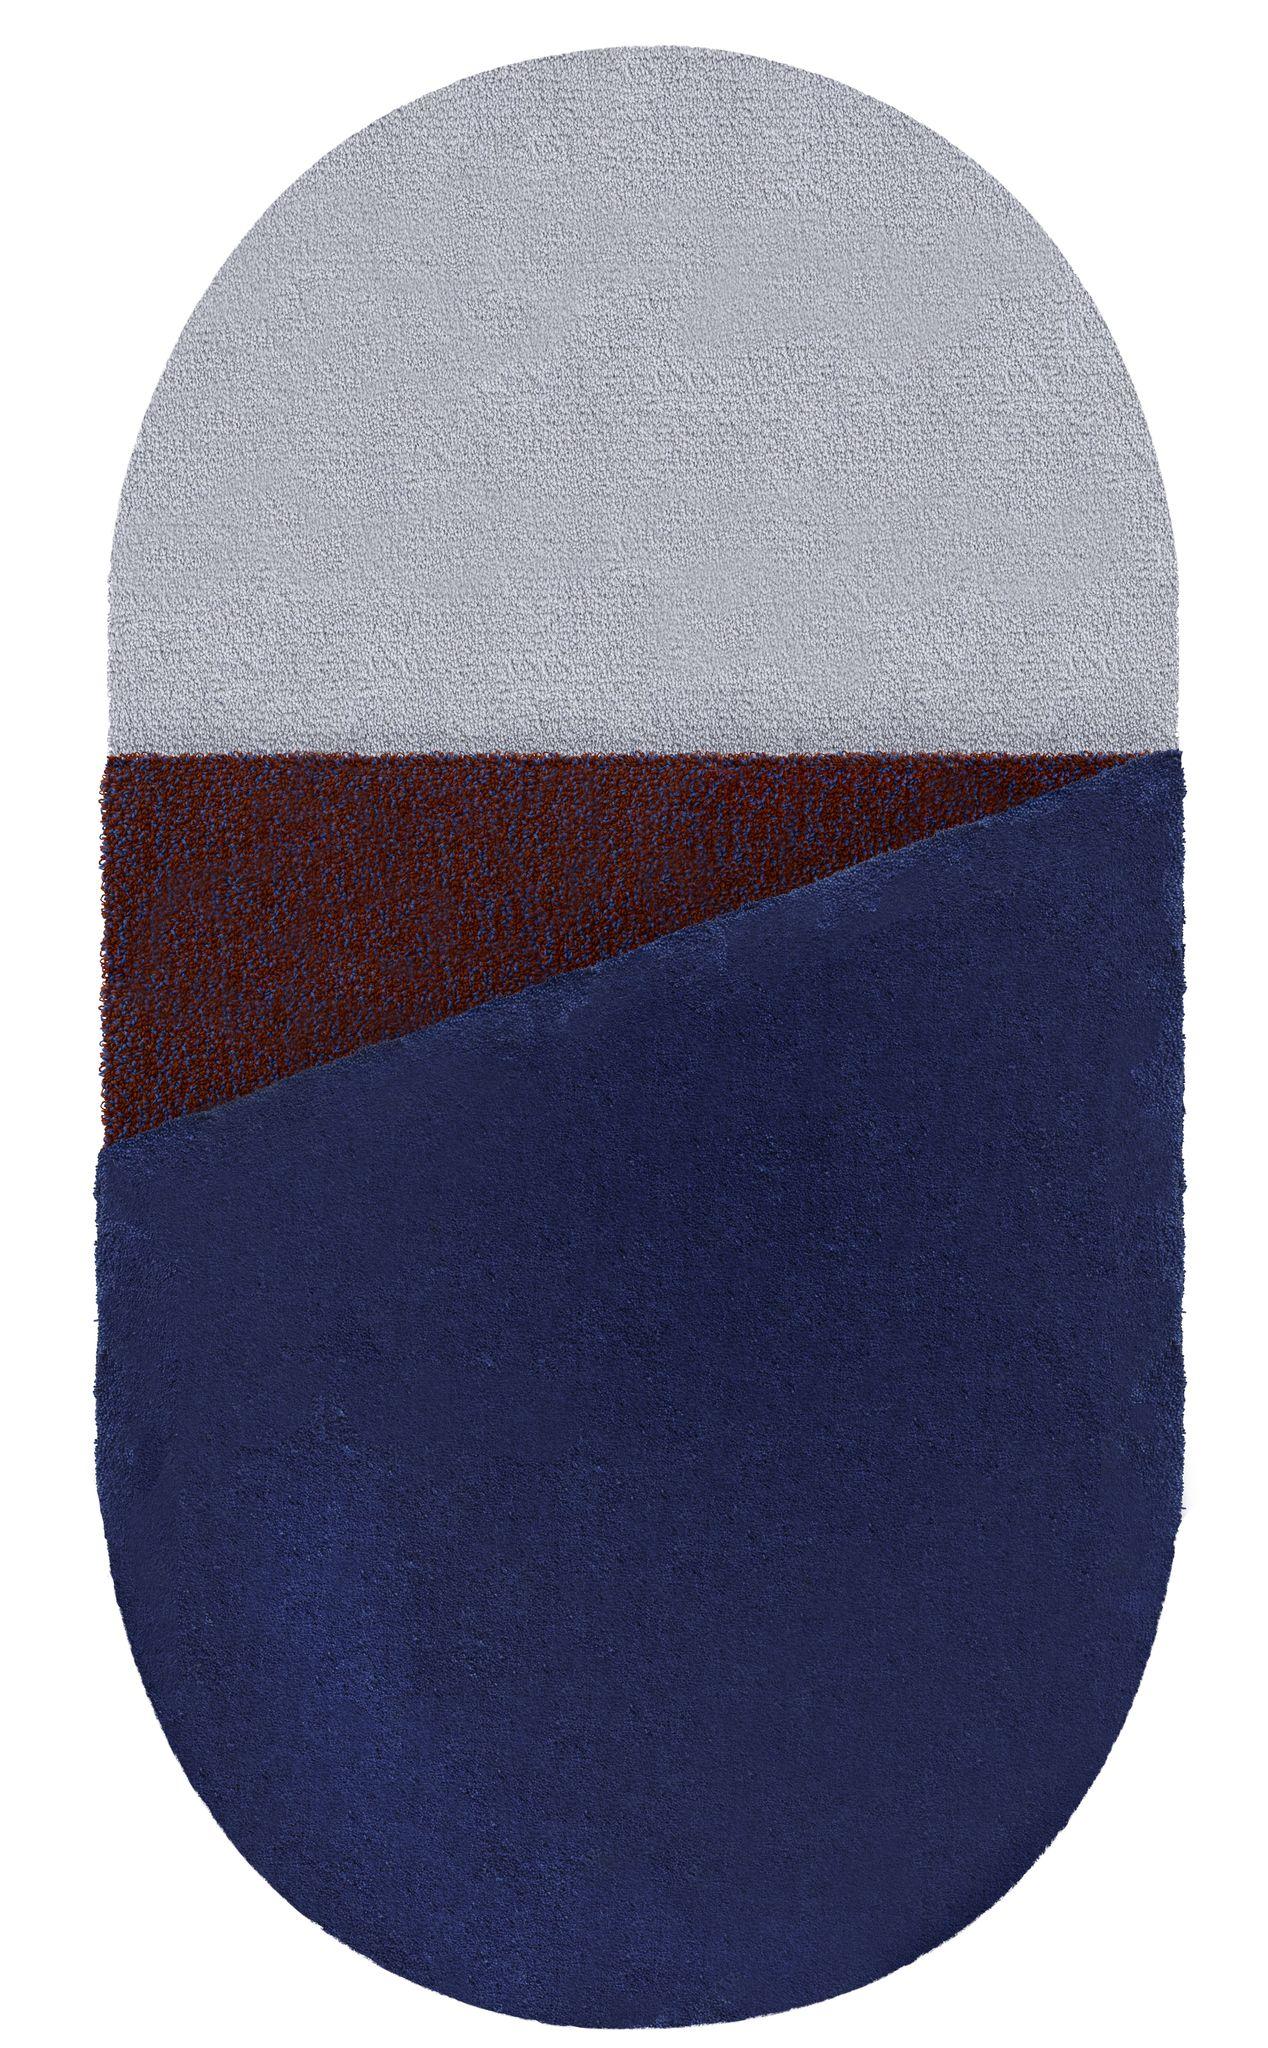 Modern Oci Triptych S, Composition of 3 Rugs 100% Wool /Blue and Brick by Portego For Sale